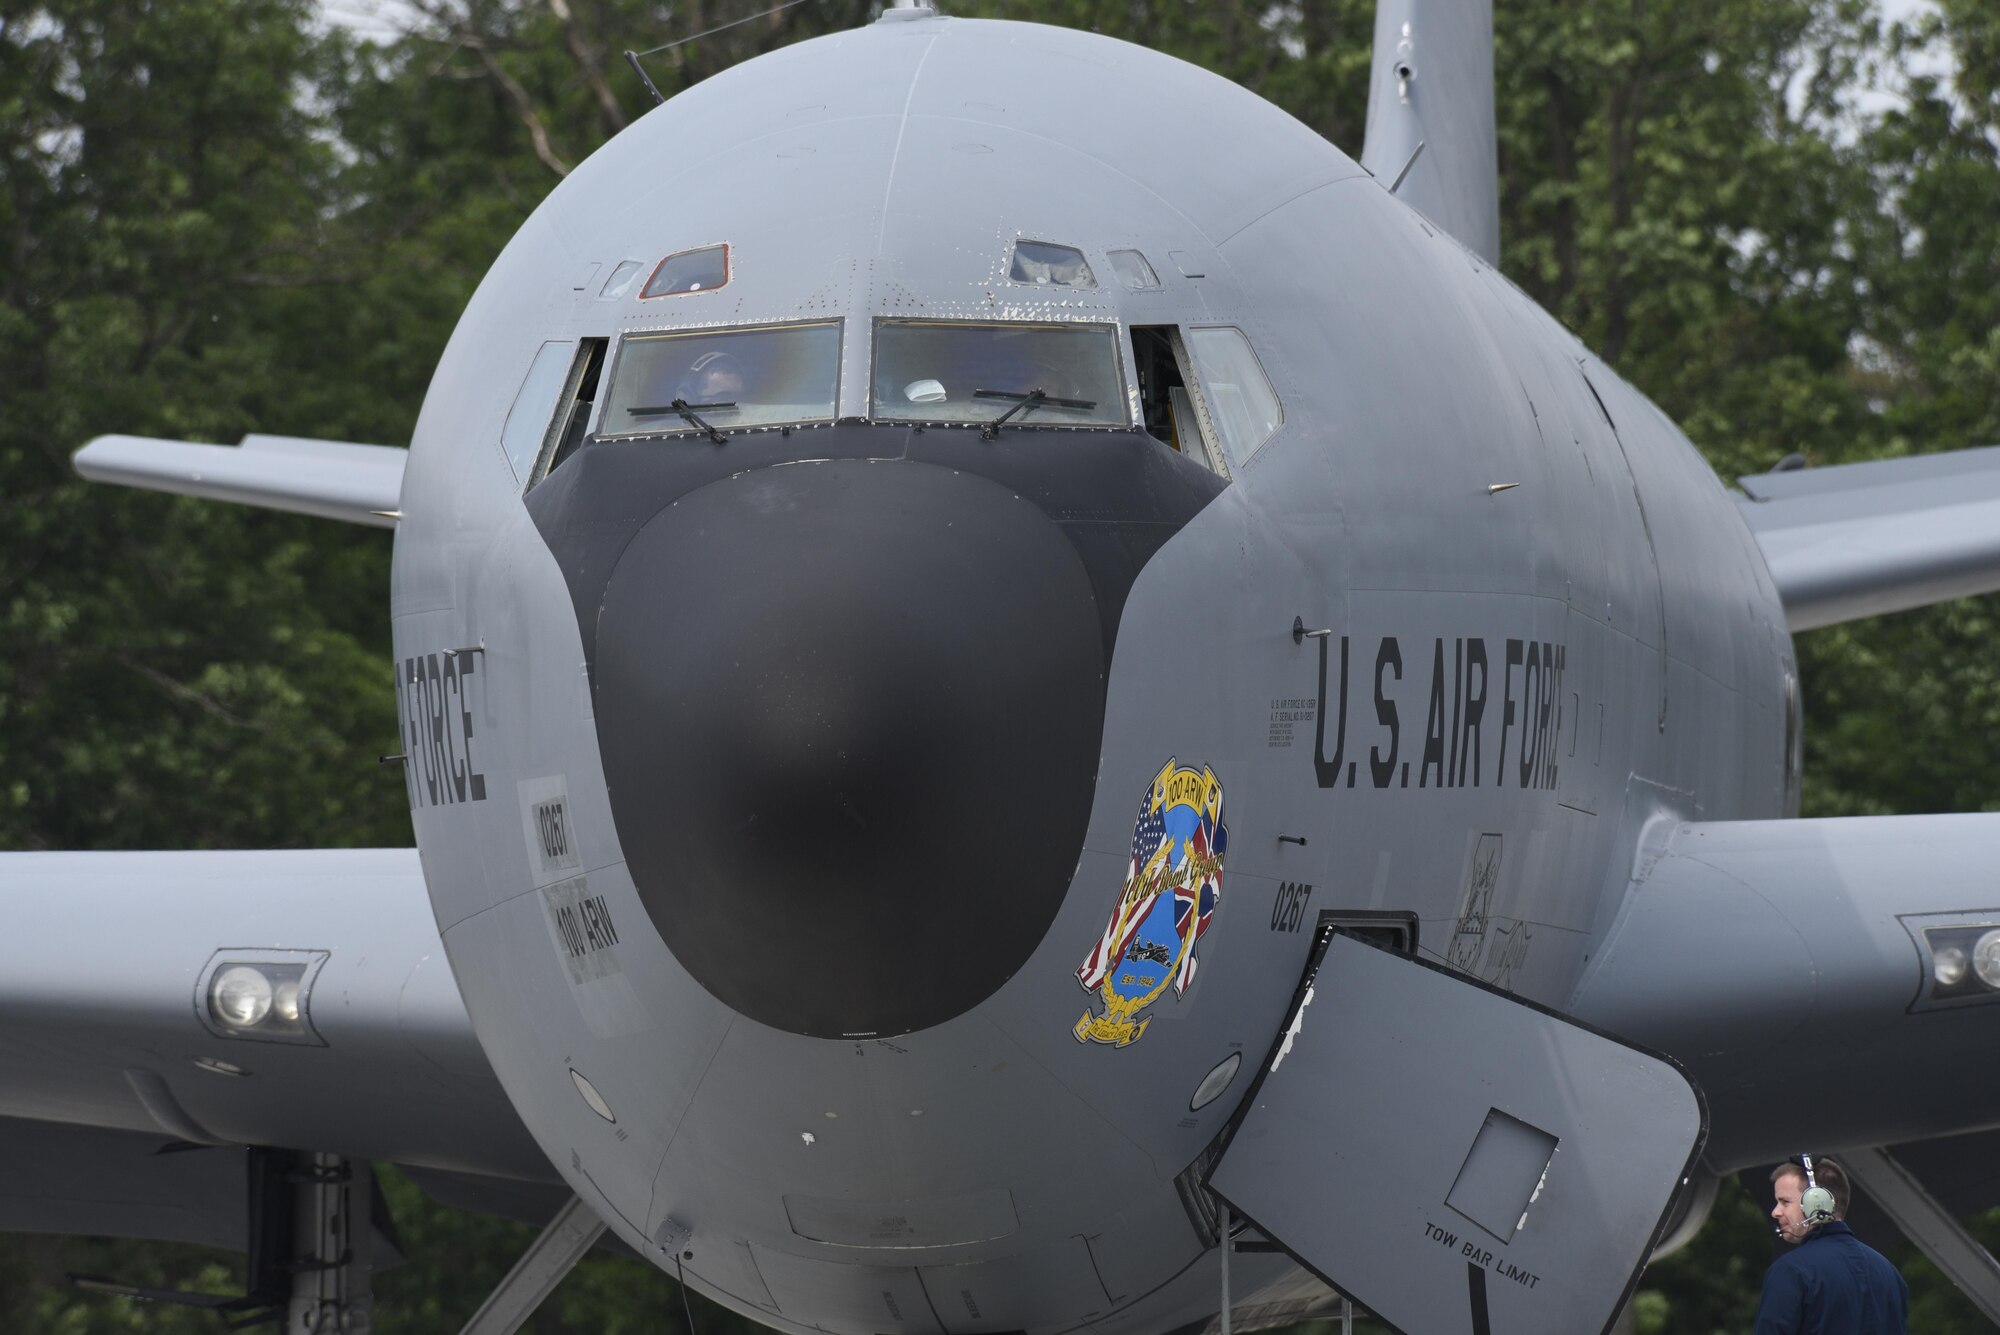 Staff Sgt. Sam Cobb, 100th Aircraft Maintenance Squadron hydraulics technician, communicates with the pilots during a pre-flight check of a KC-135R Stratotanker at Powidz Air Base, Poland, June 5, 2017. BALTOPS is an annually recurring multinational exercise designed to enhance flexibility and interoperability, as well as demonstrate resolve of allied and partner forces to defend the Baltic region. Participating nations include Belgium, Denmark, Estonia, Finland, France, Germany, Latvia, Lithuania, the Netherlands, Norway, Poland, Sweden, the United Kingdom, and the United States. (U.S. Air Force photo by Staff Sgt. Jonathan Snyder)